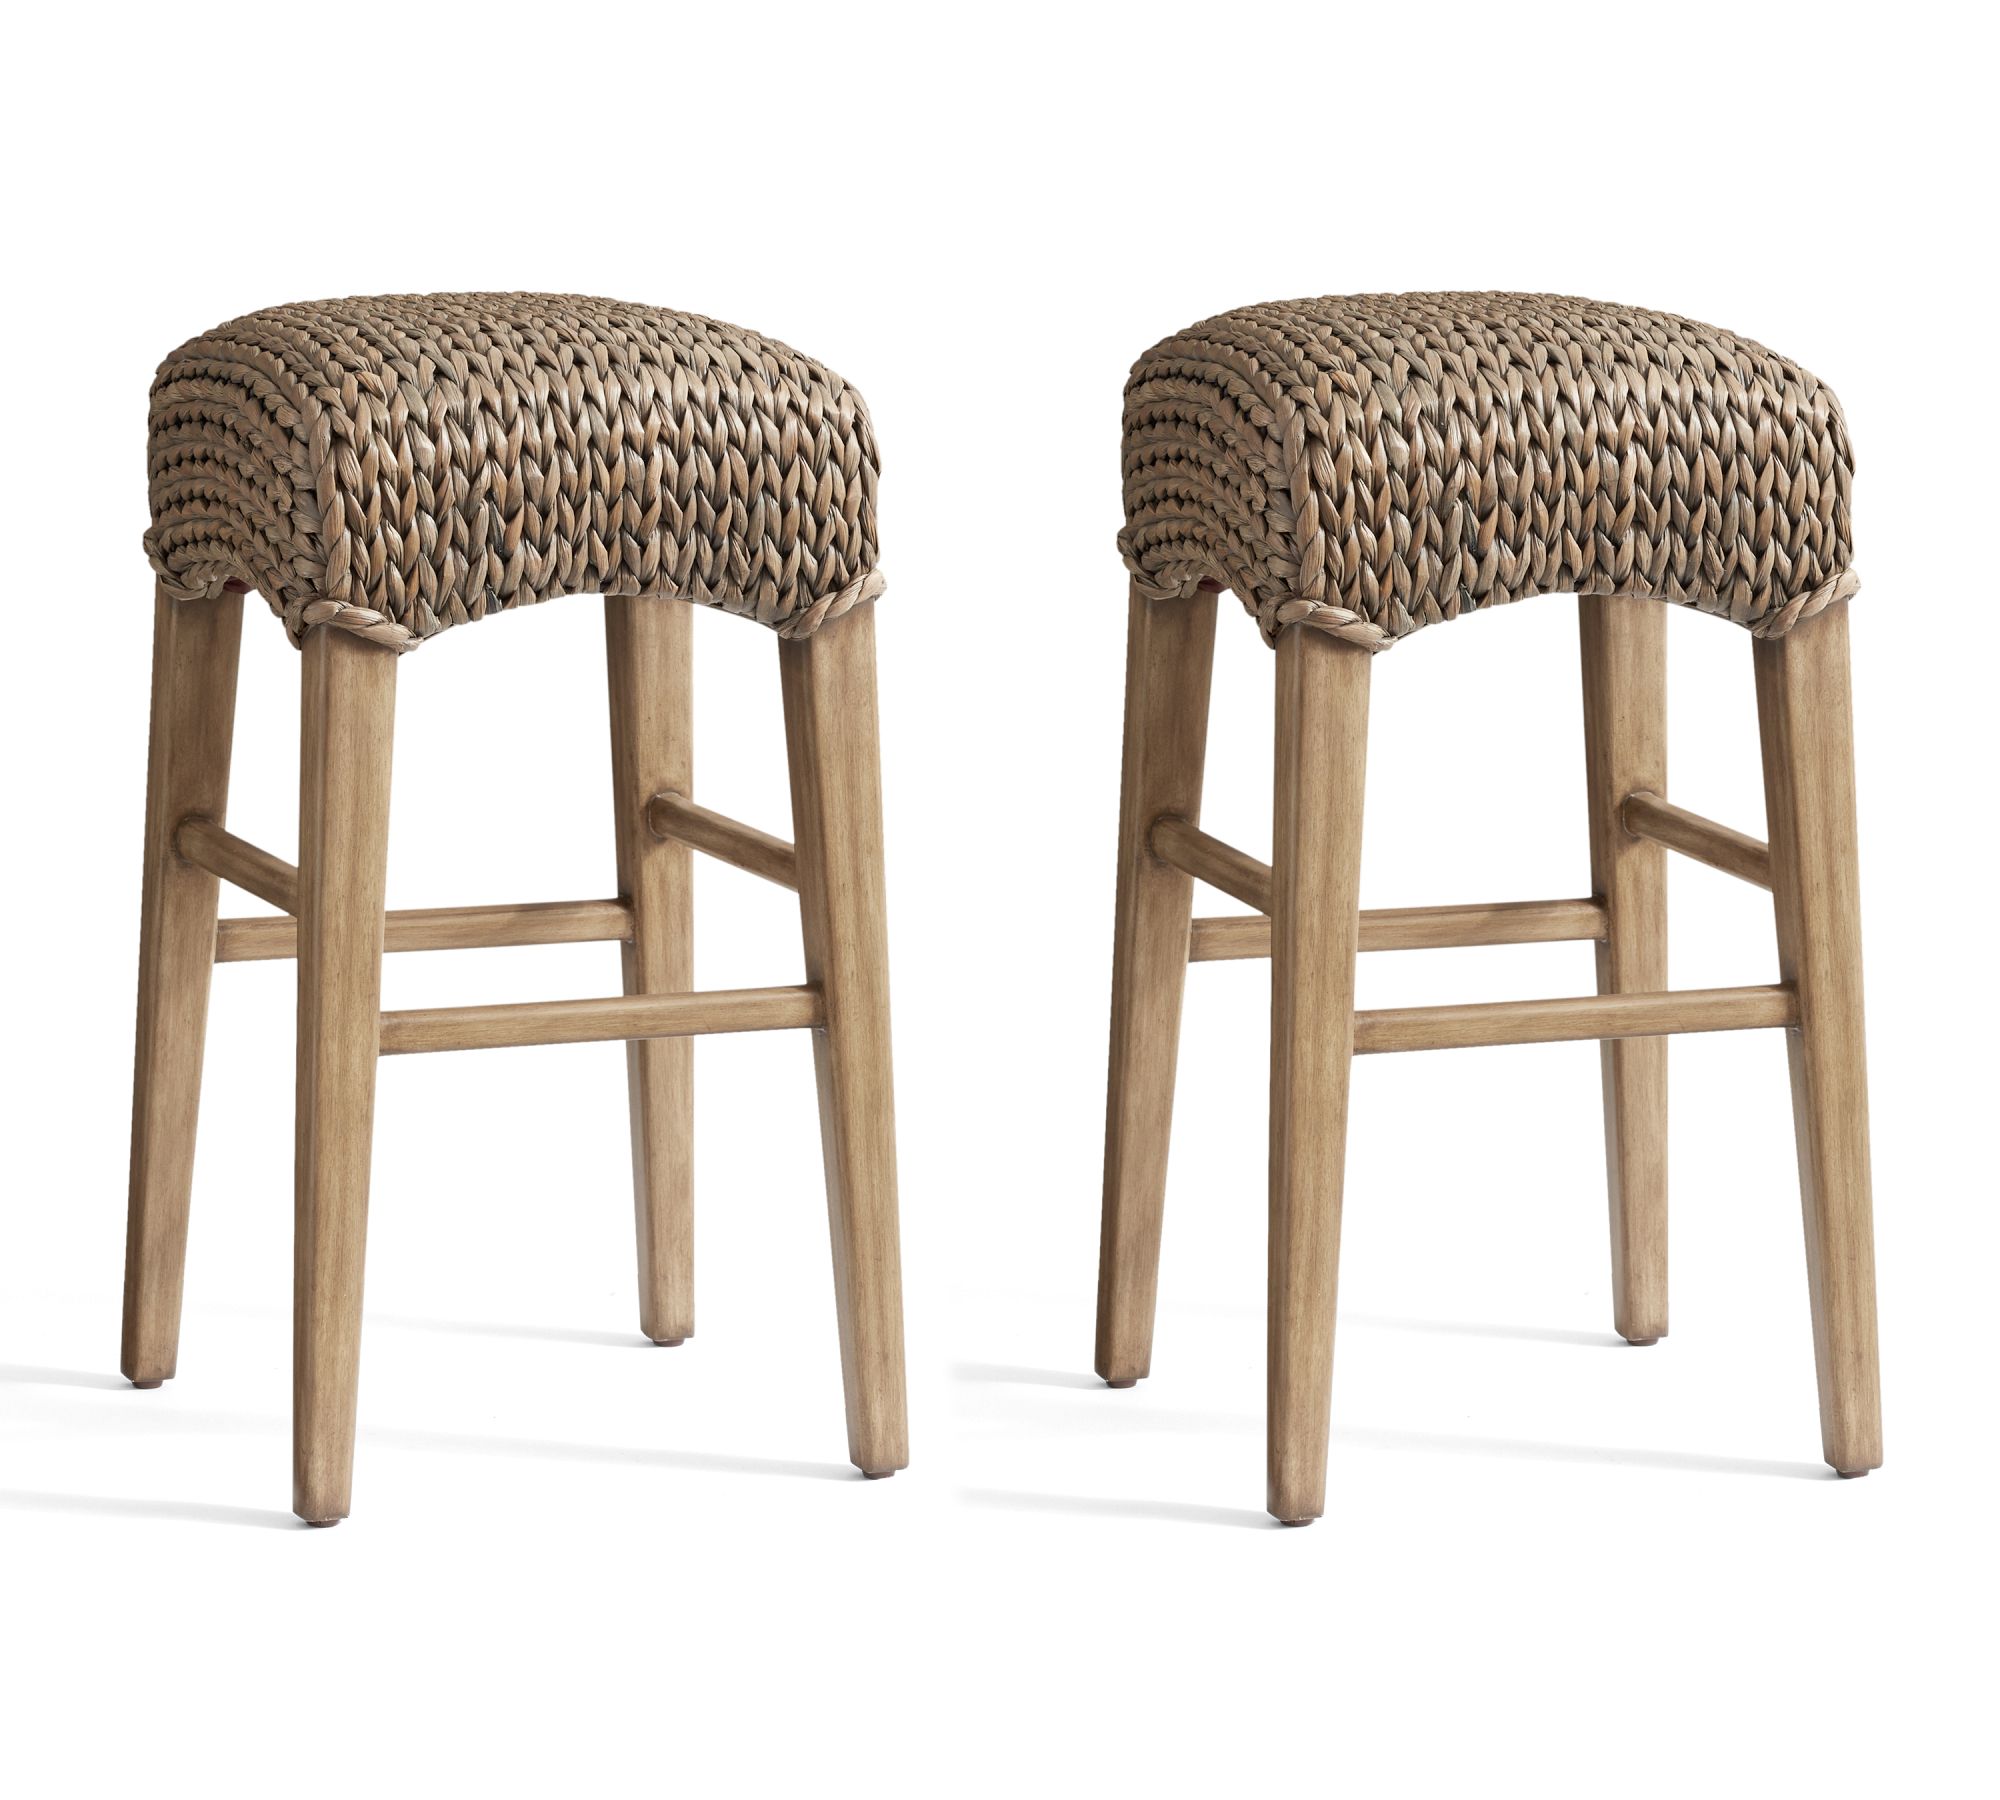 Seagrass Backless Counter Stool